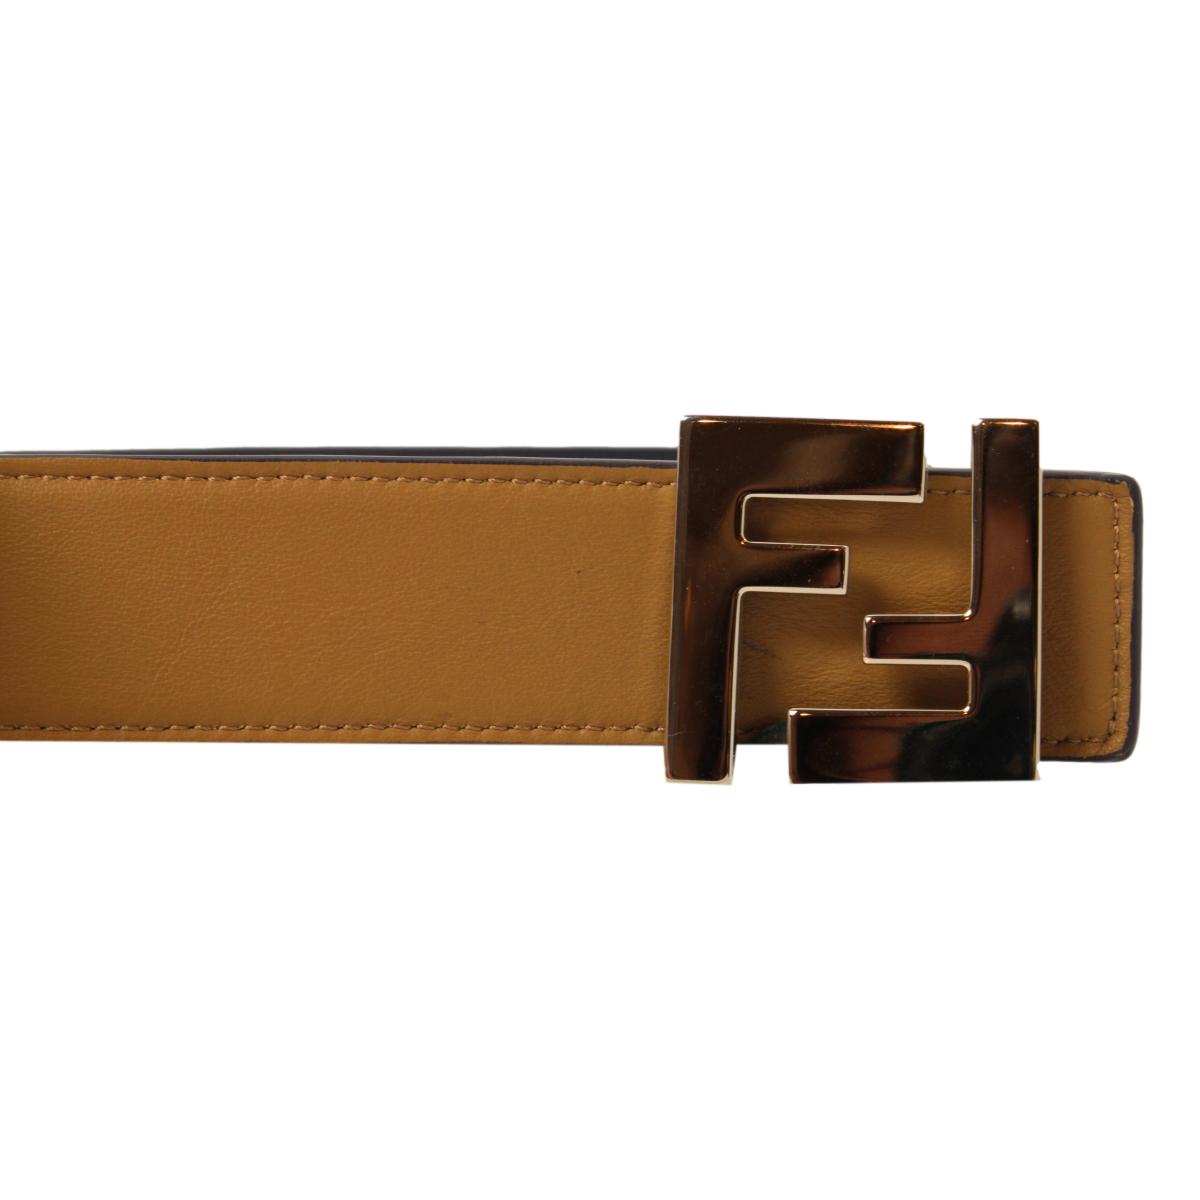 Fendi Reversible Brown Blue Leather FF Belt Size 110/44 7C0424 at_Queen_Bee_of_Beverly_Hills